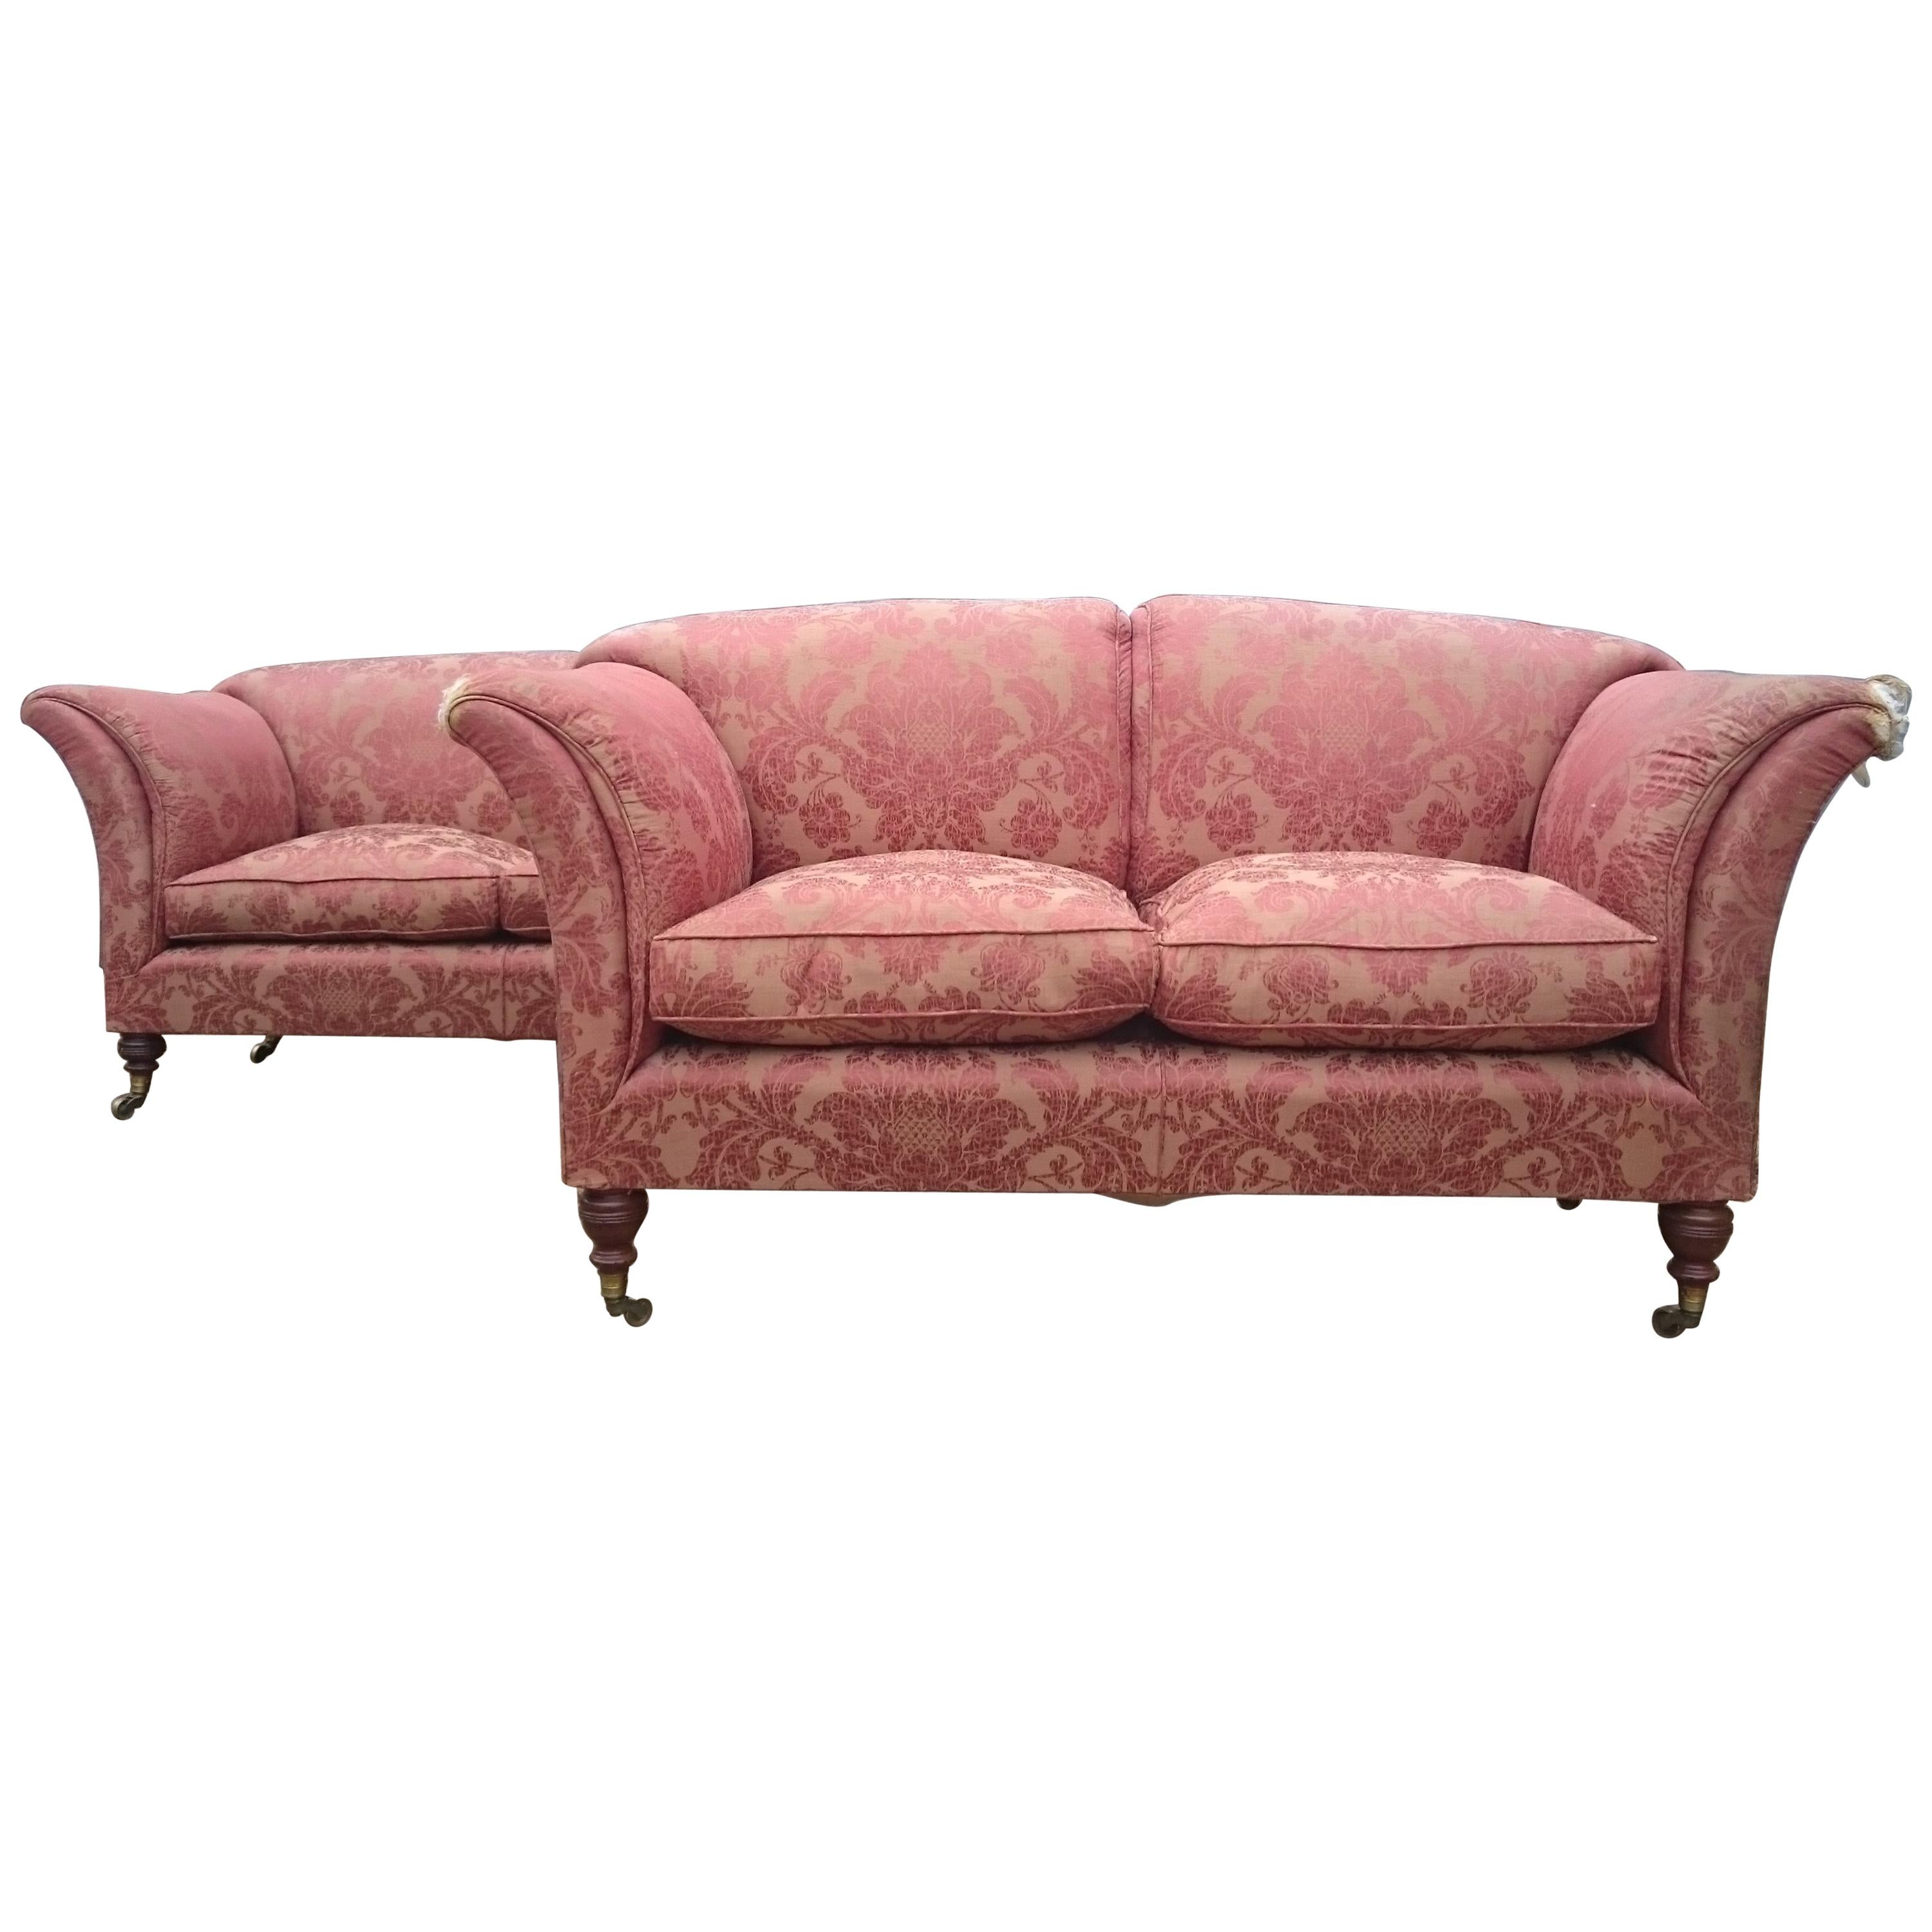 19th Century Antique Grantley Sofa by Howard and Sons of London